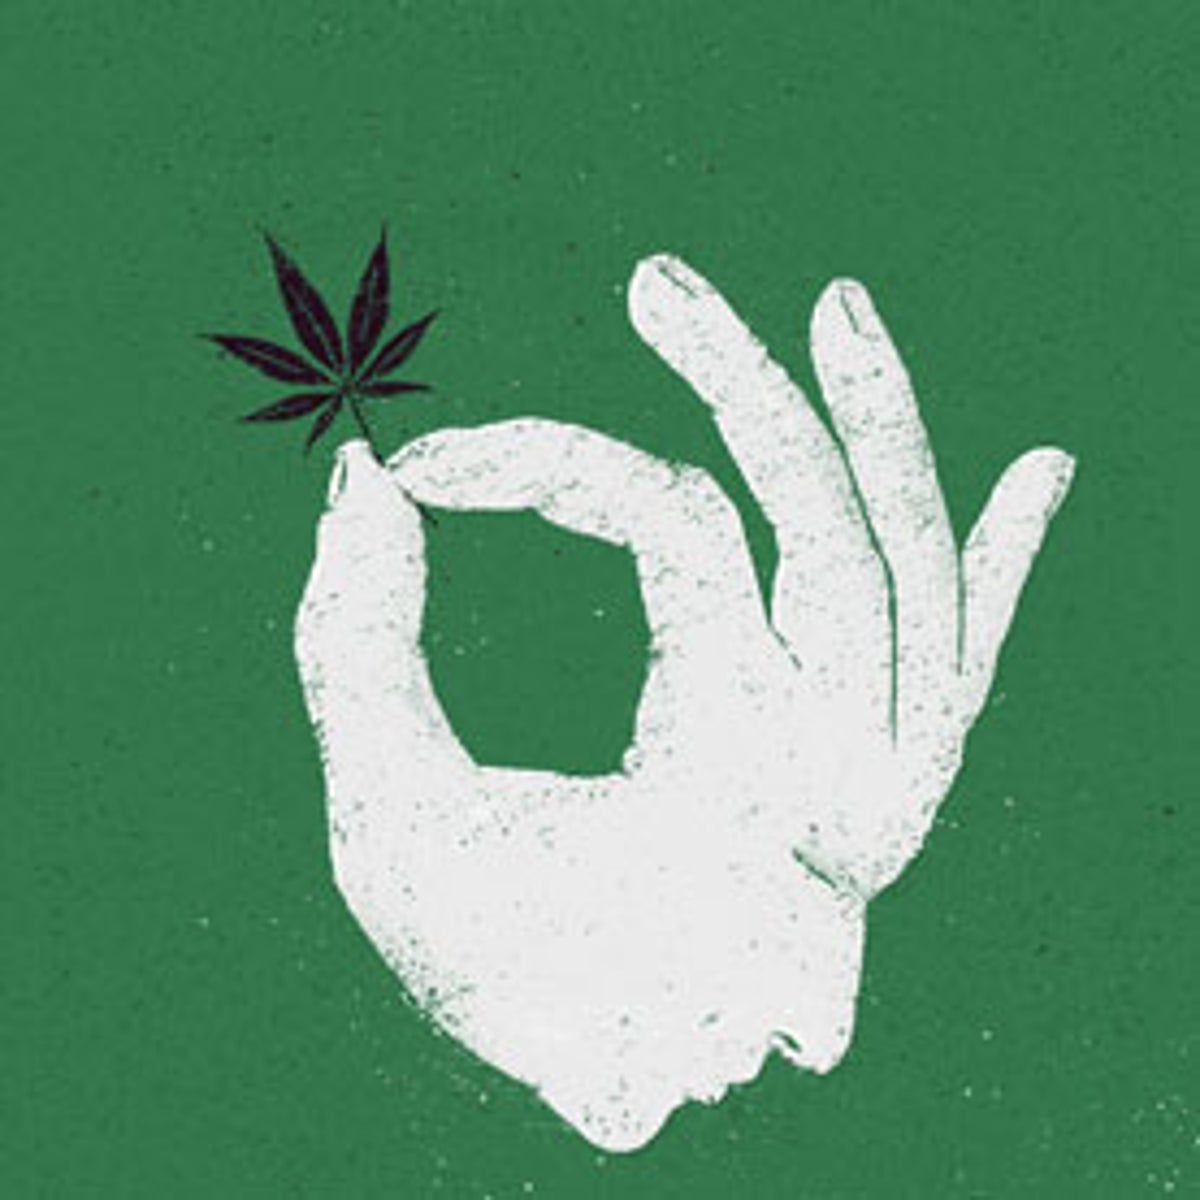 Is Weed Really a Gateway Drug?